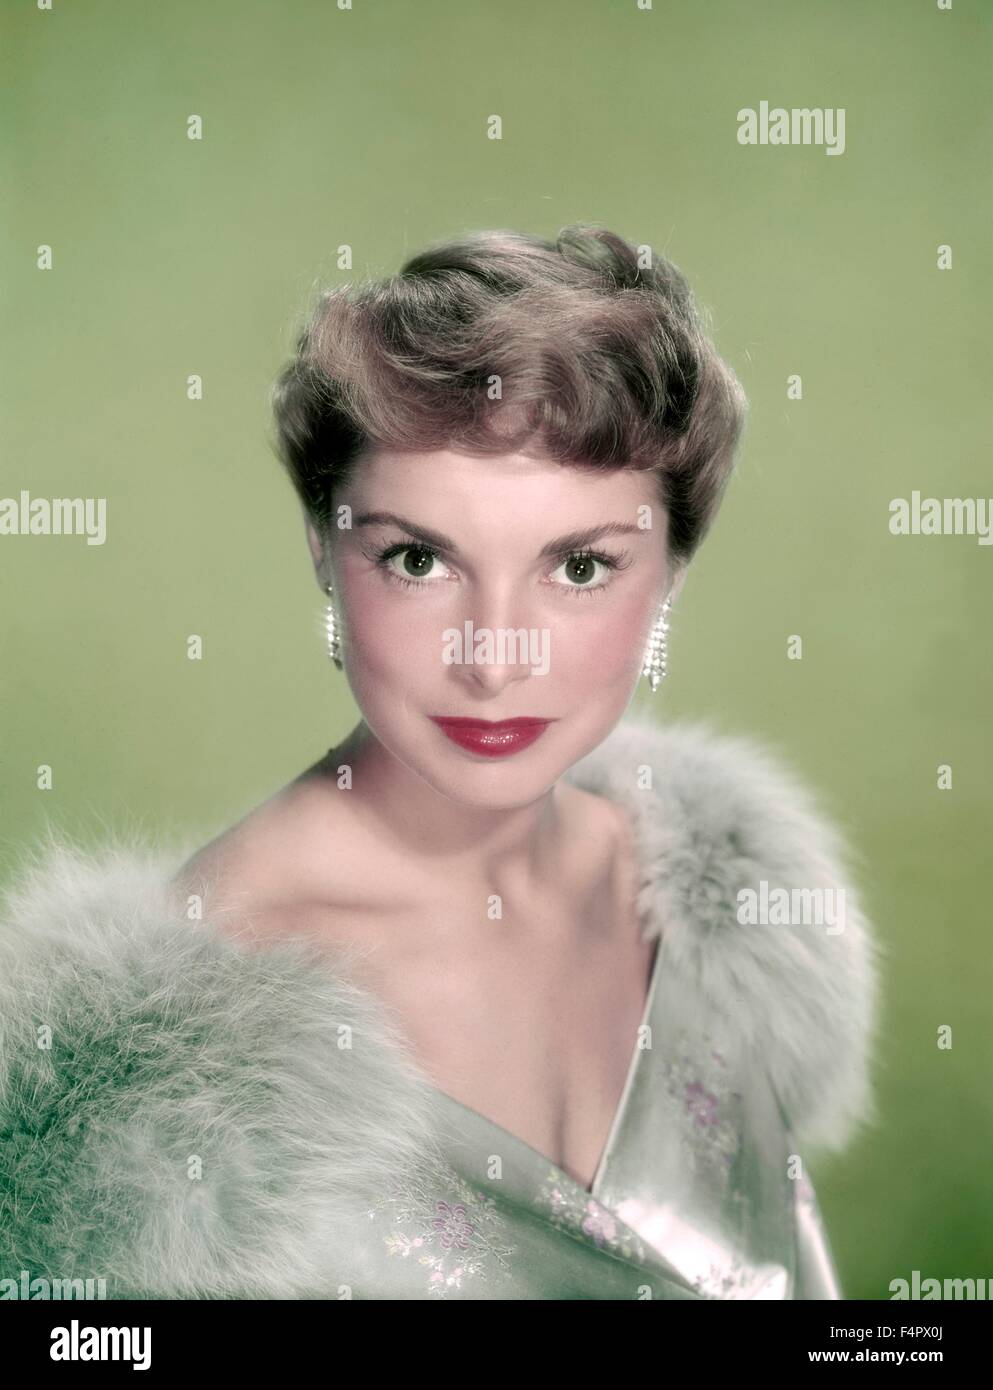 Janet leigh images